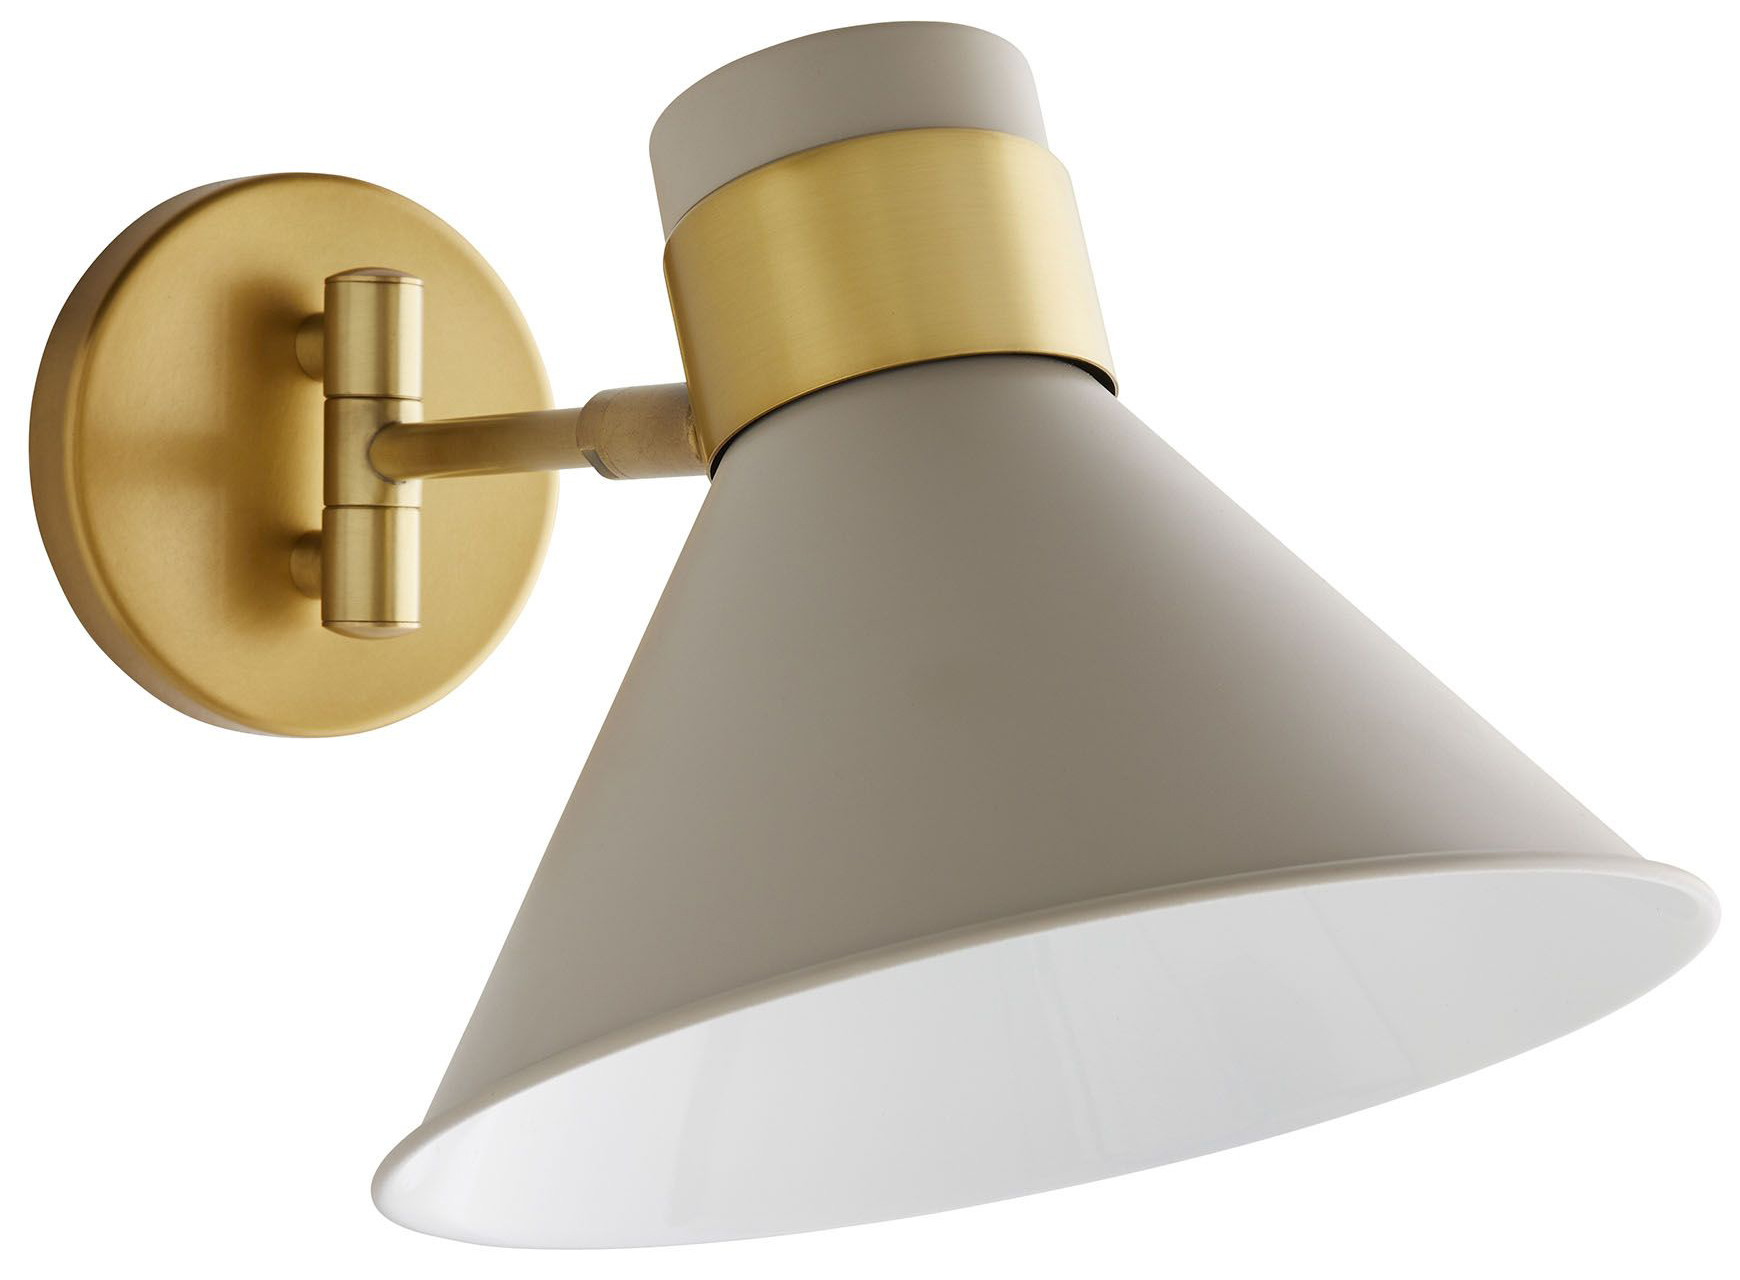 Lane Adjustable Wall Sconce by Arteriors Home | AH-49204 AHM1086126